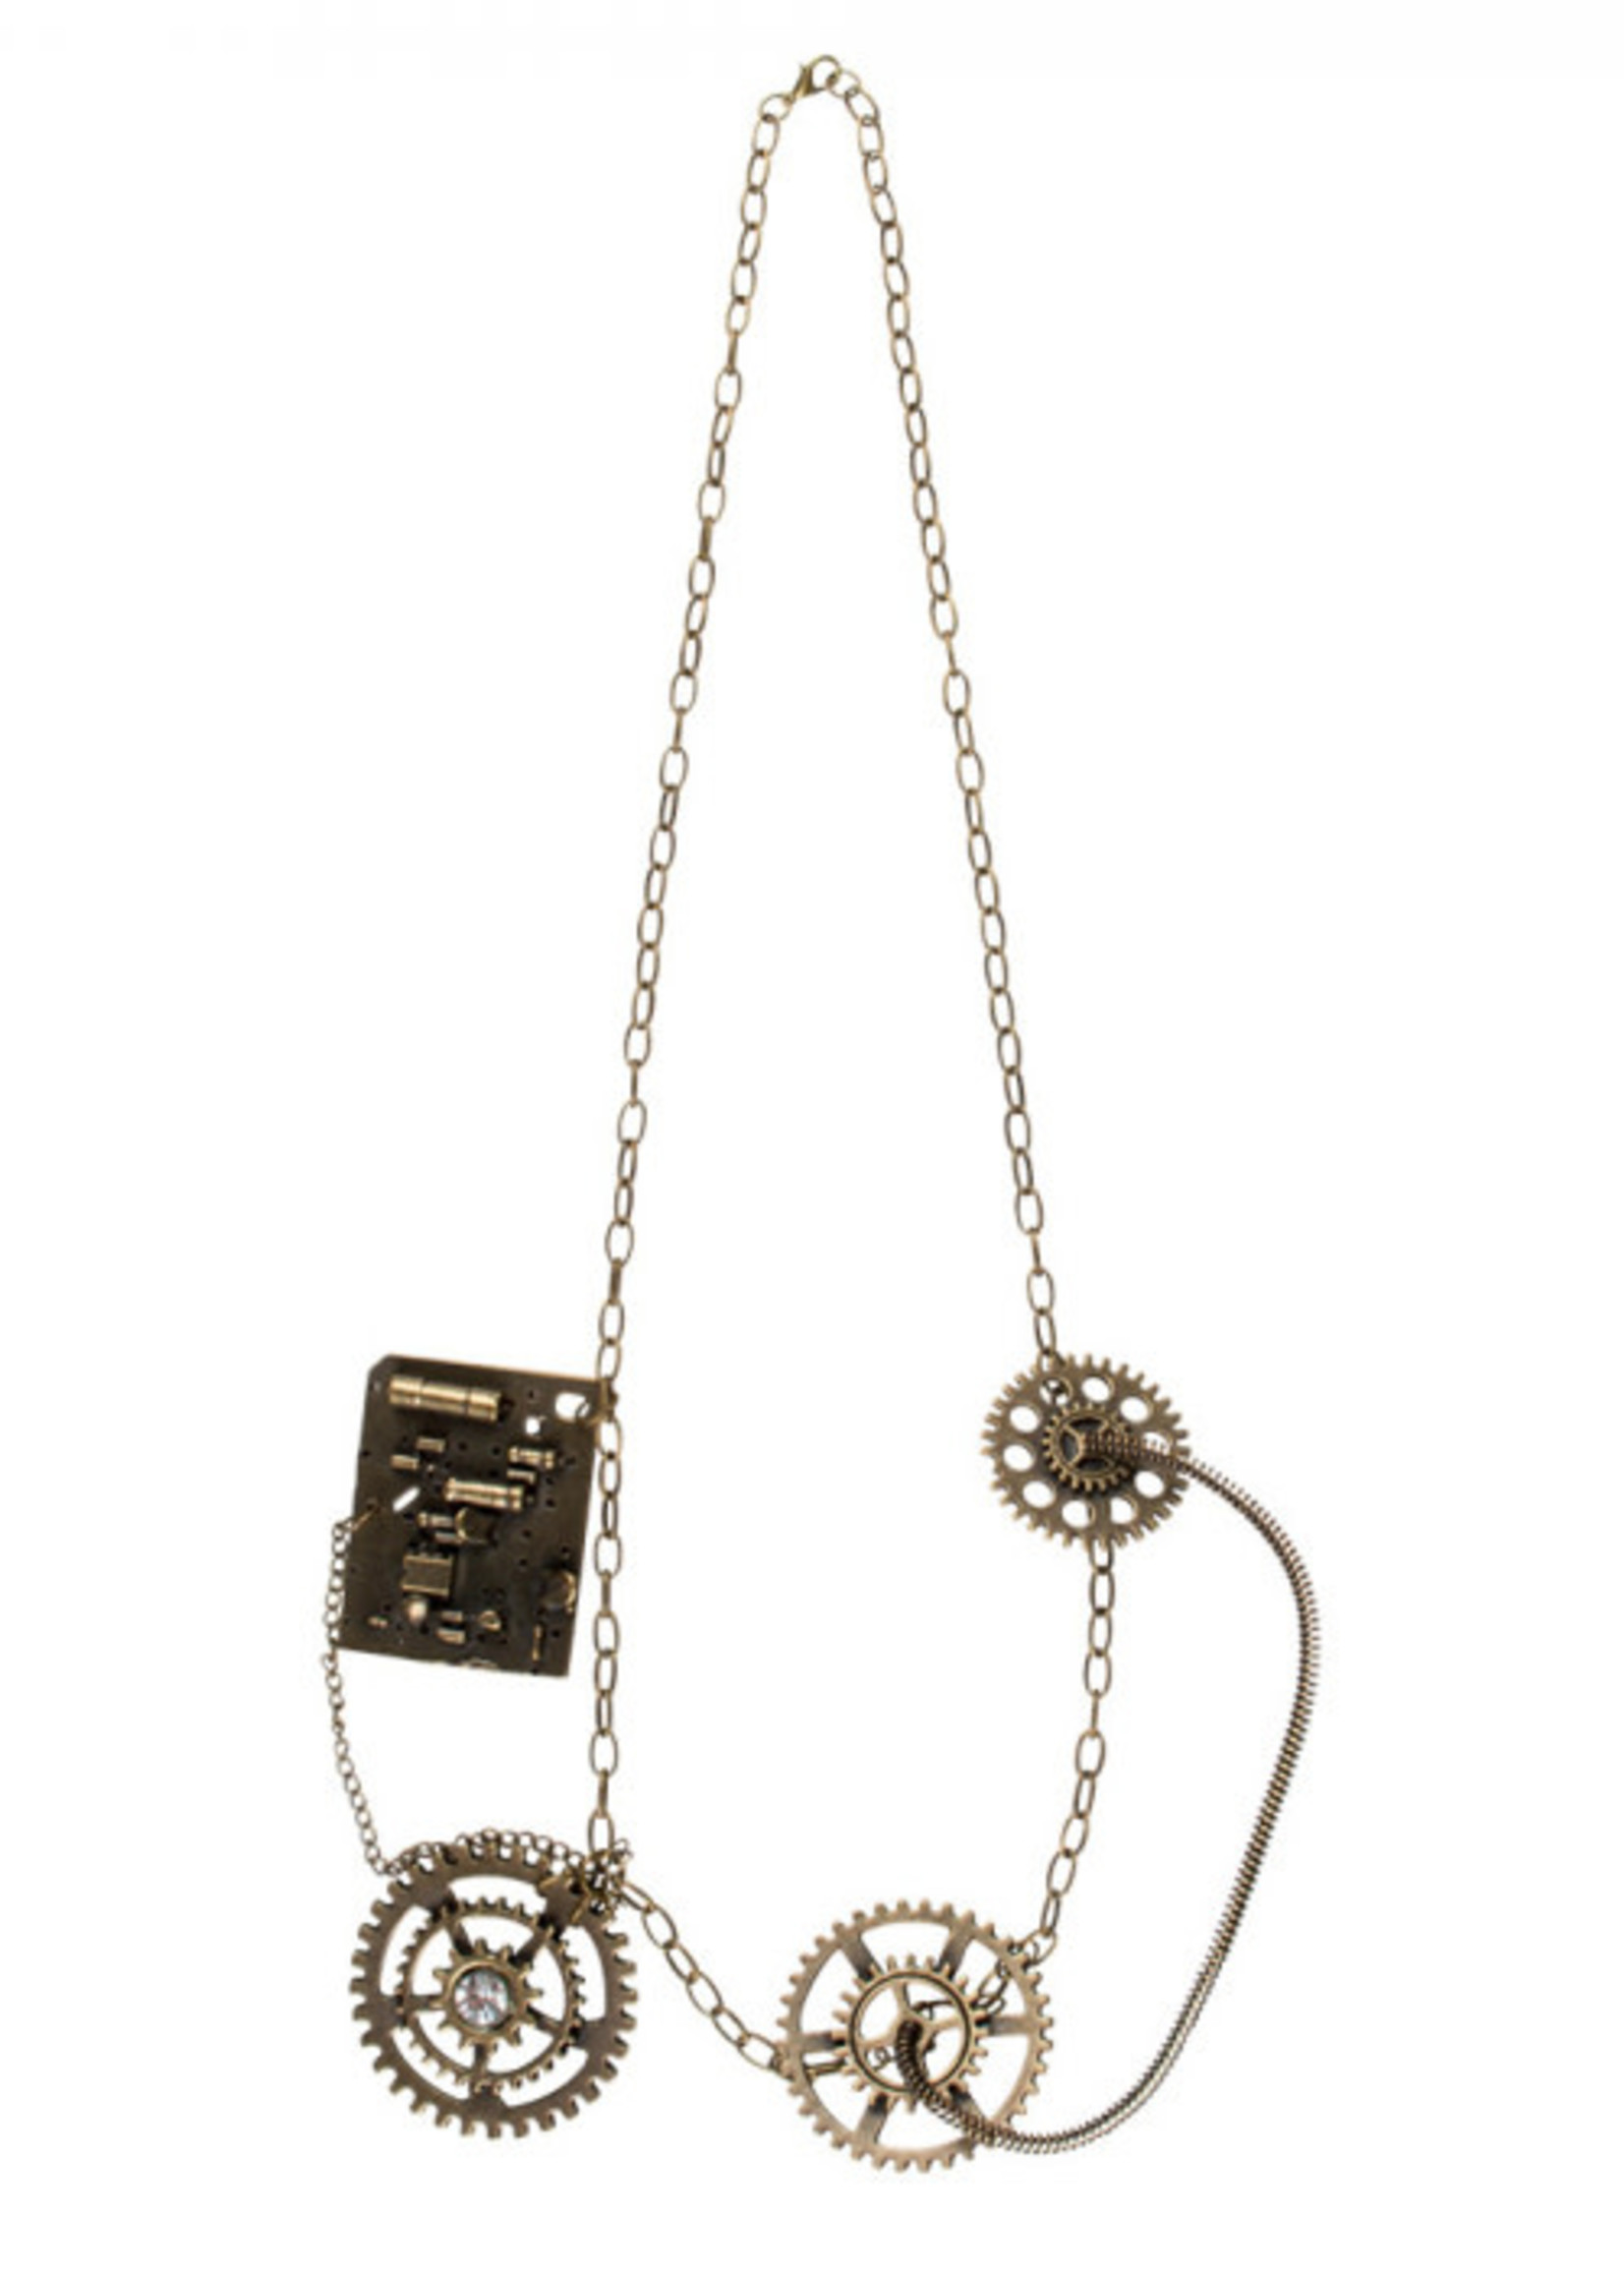 Boland Ketting Steampunk Deluxe